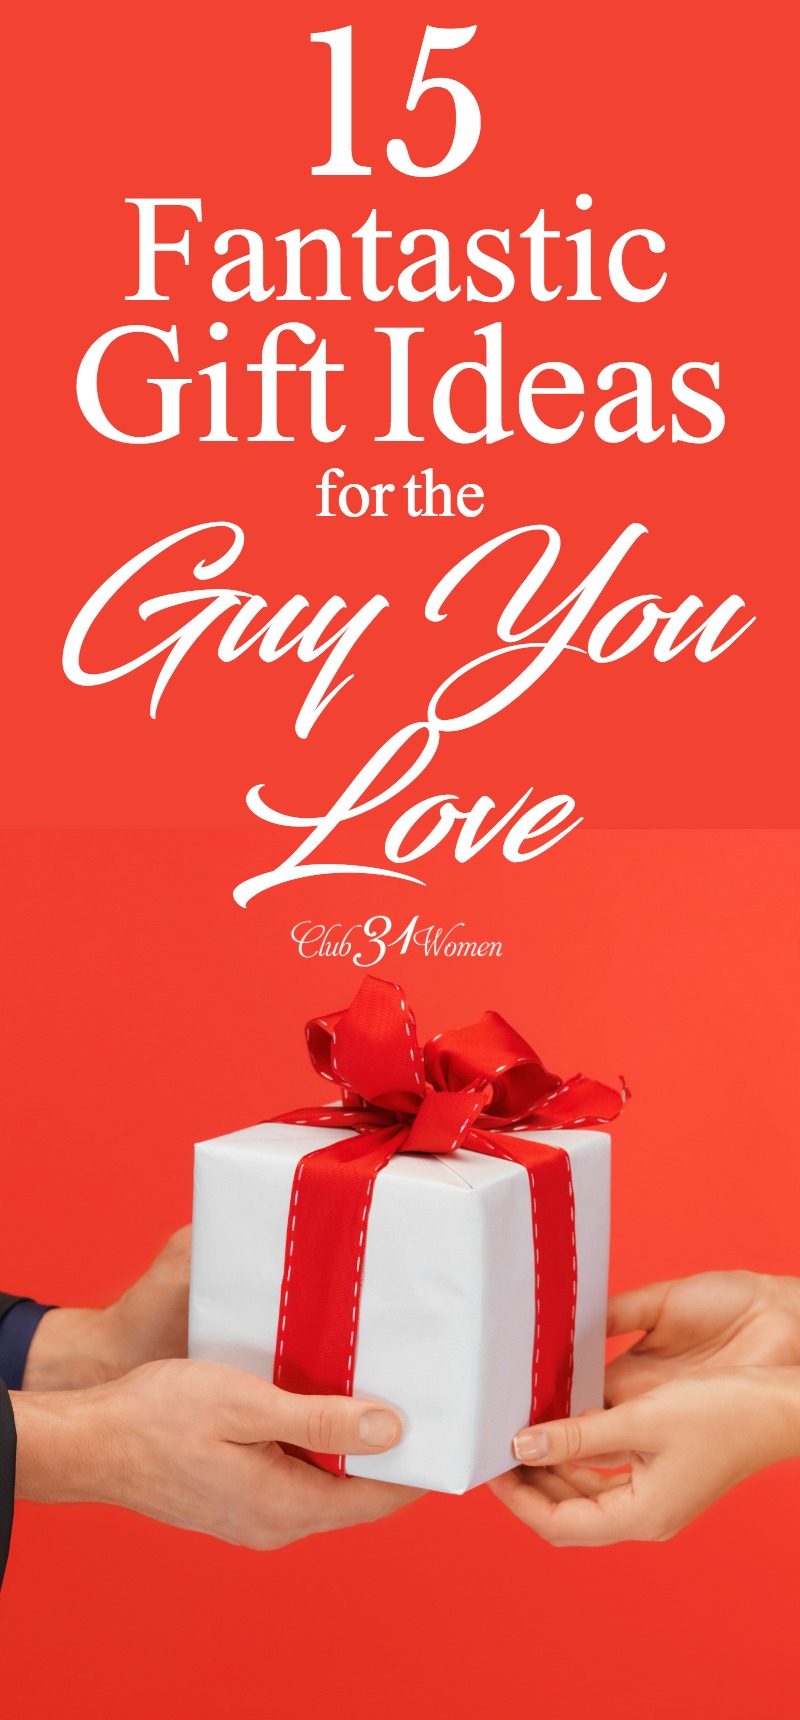 We are always on the lookout for fresh gift ideas for the guy we love. Here are some great suggestions to get you started! via @Club31Women